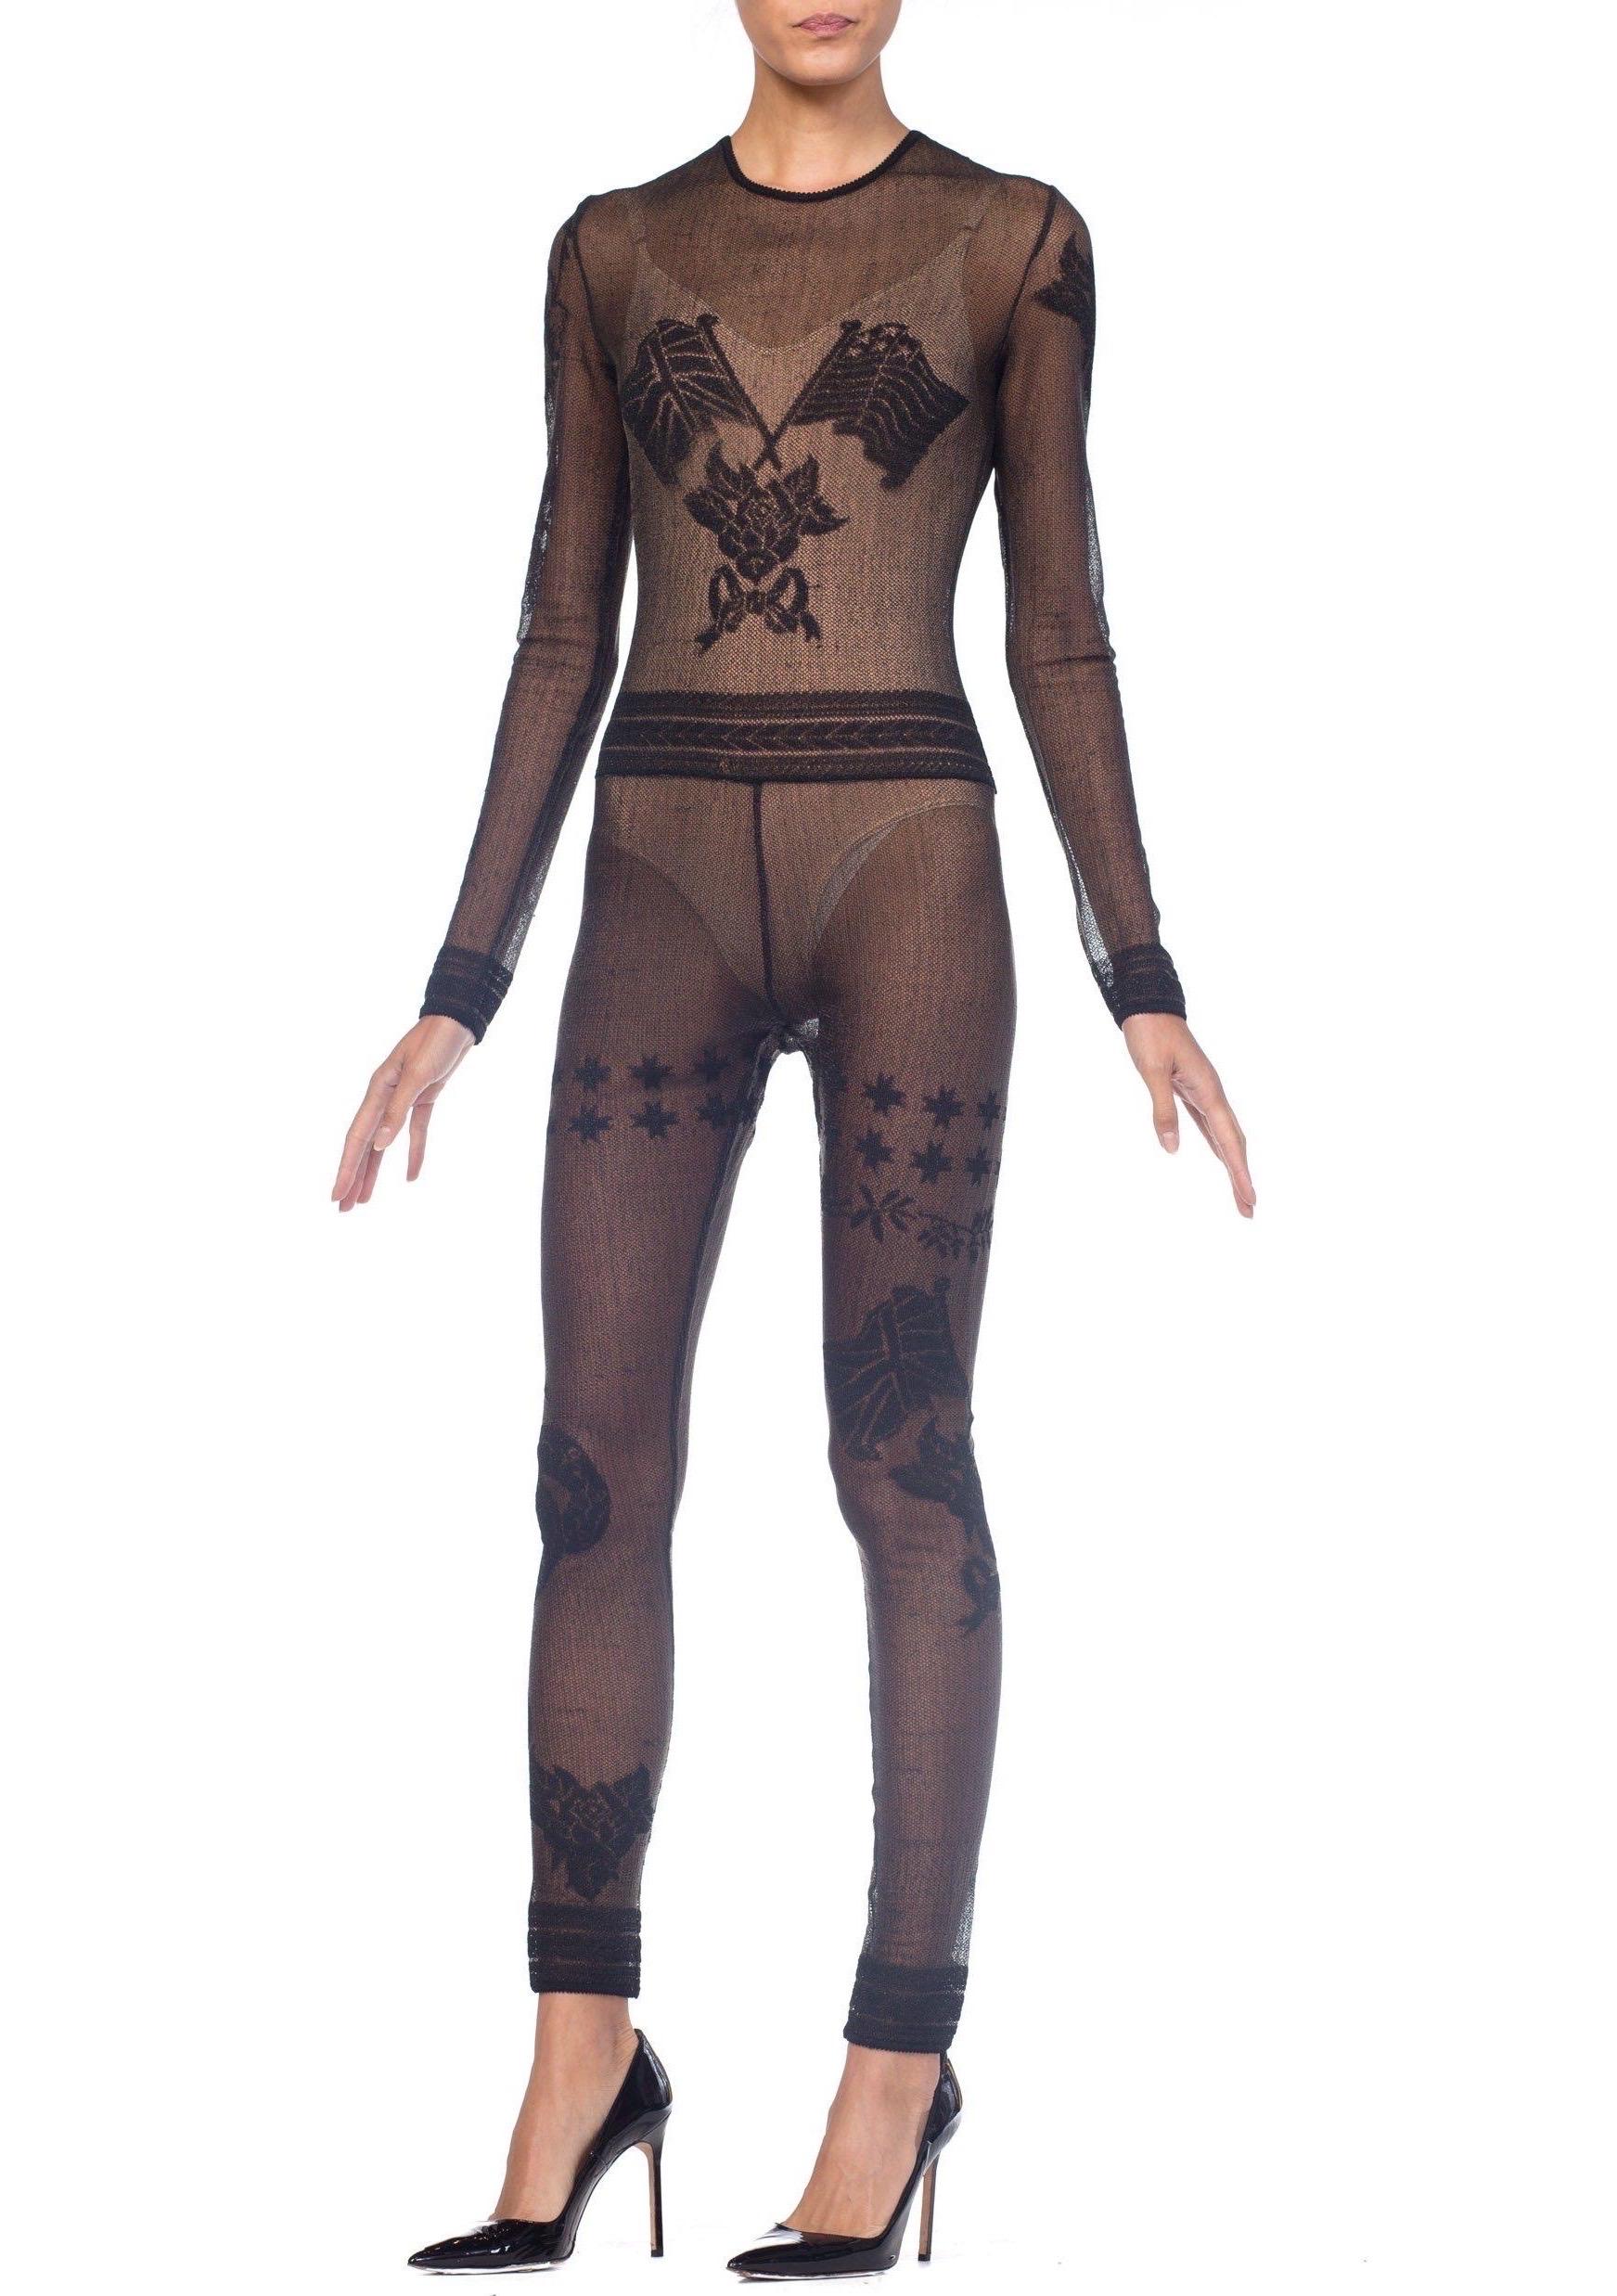 1990S JOHN GALLIANO Sheer Knit Bodysuit Jumpsuit From The Siouxsie Sphinx Collection